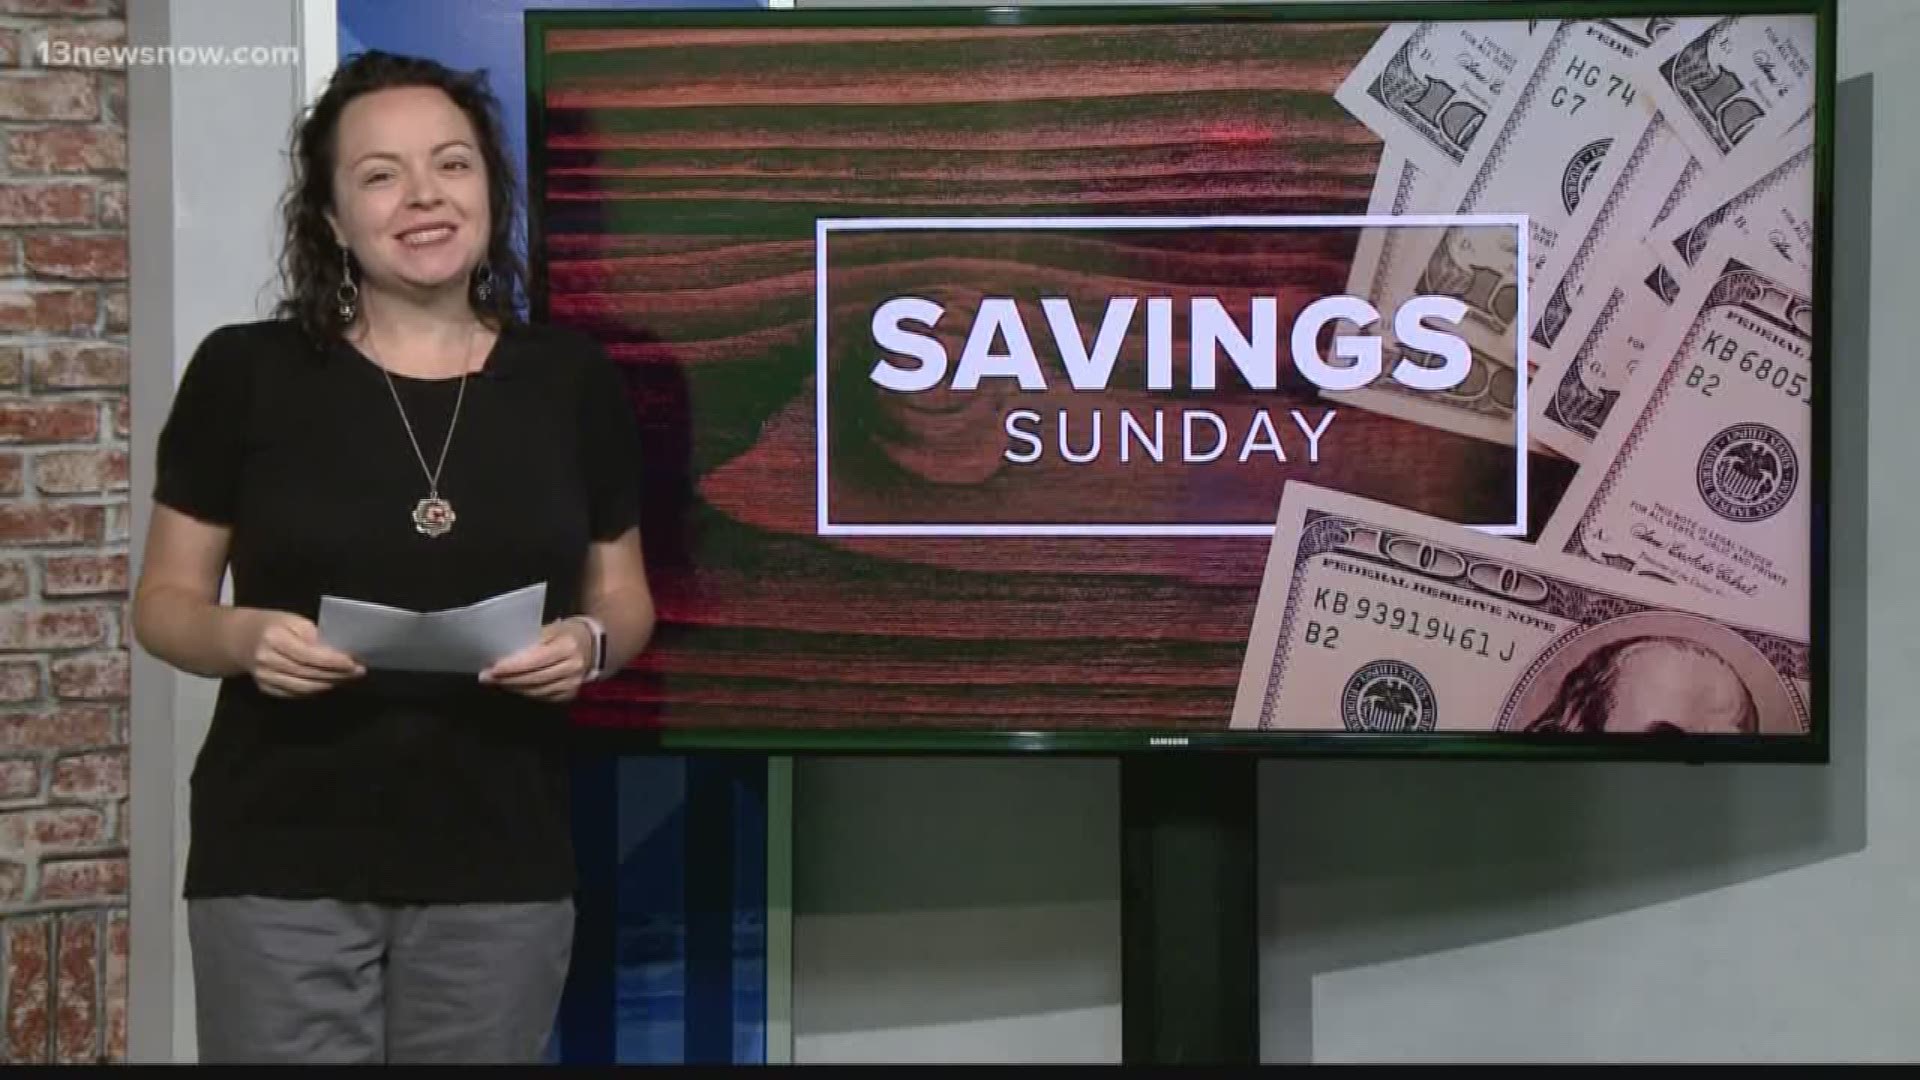 Laura Oliver from afrugralchick.com has your big savings for the week of Oct. 14, 2018.